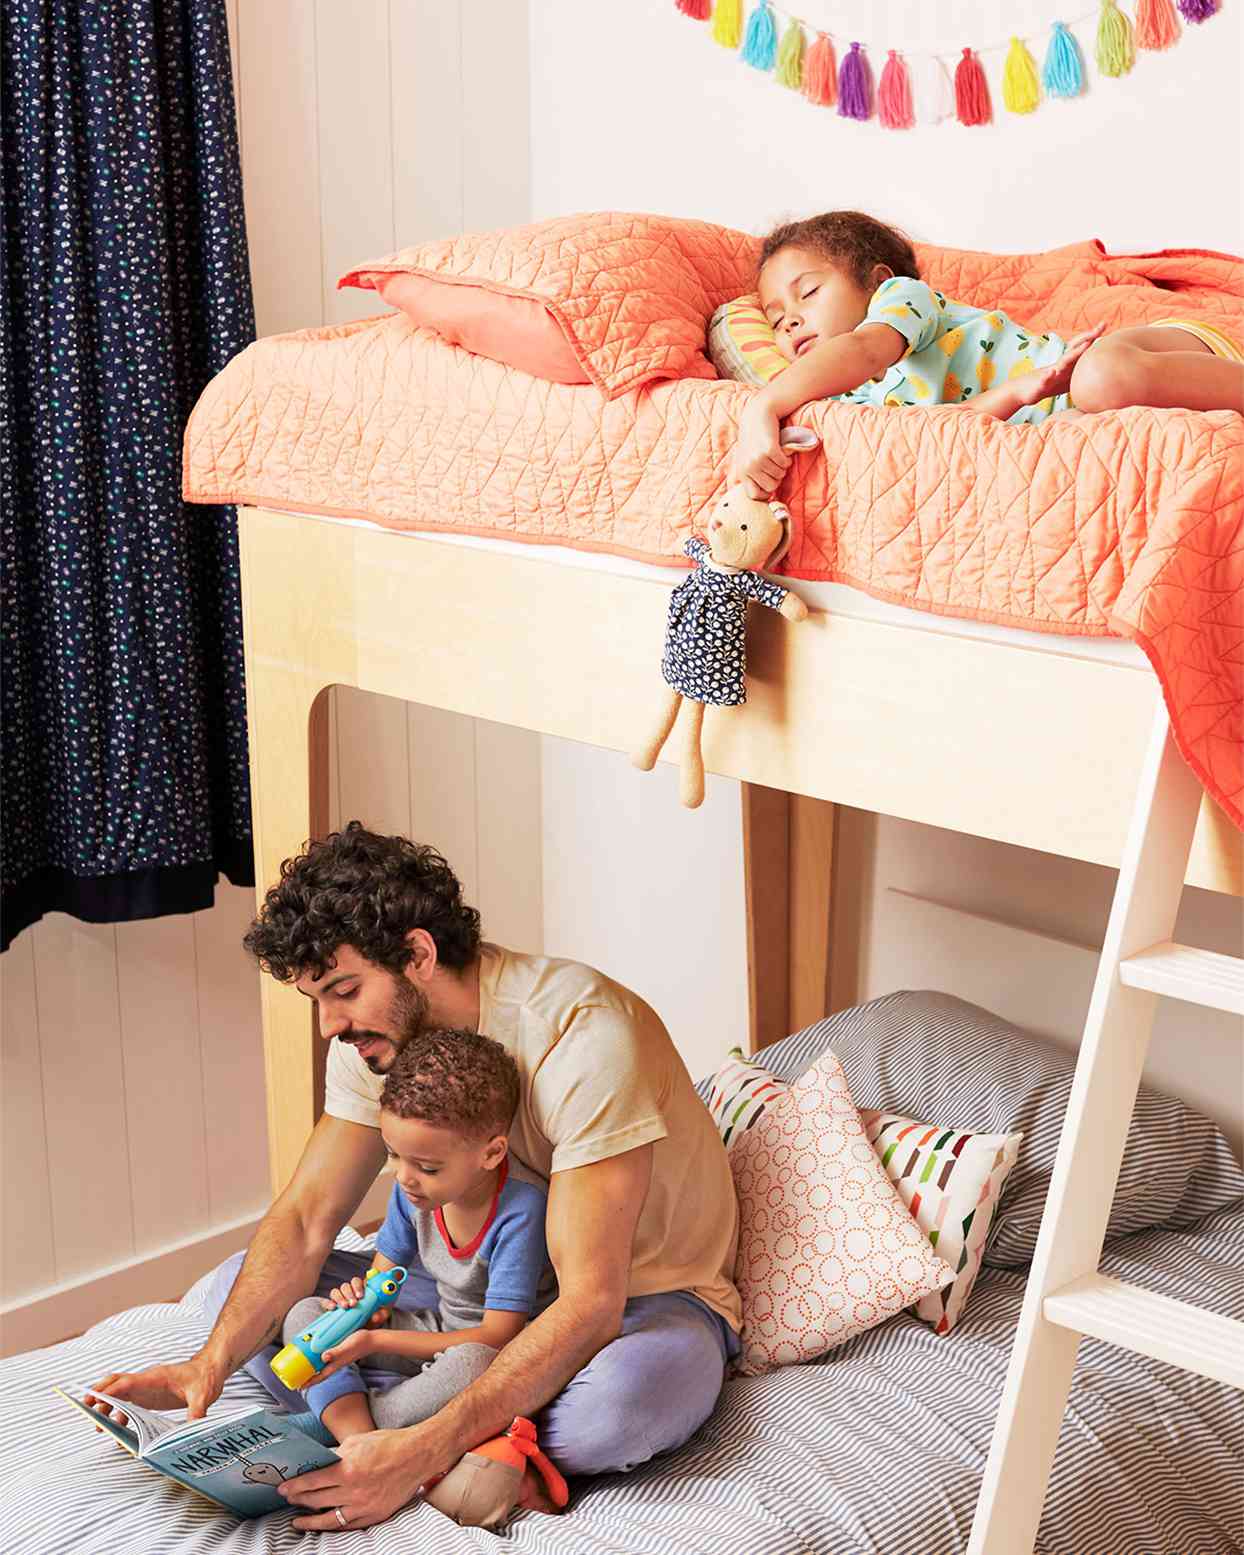 Sleep Train Toddlers And Big Kids, At What Age Can A Child Sleep In Loft Bed